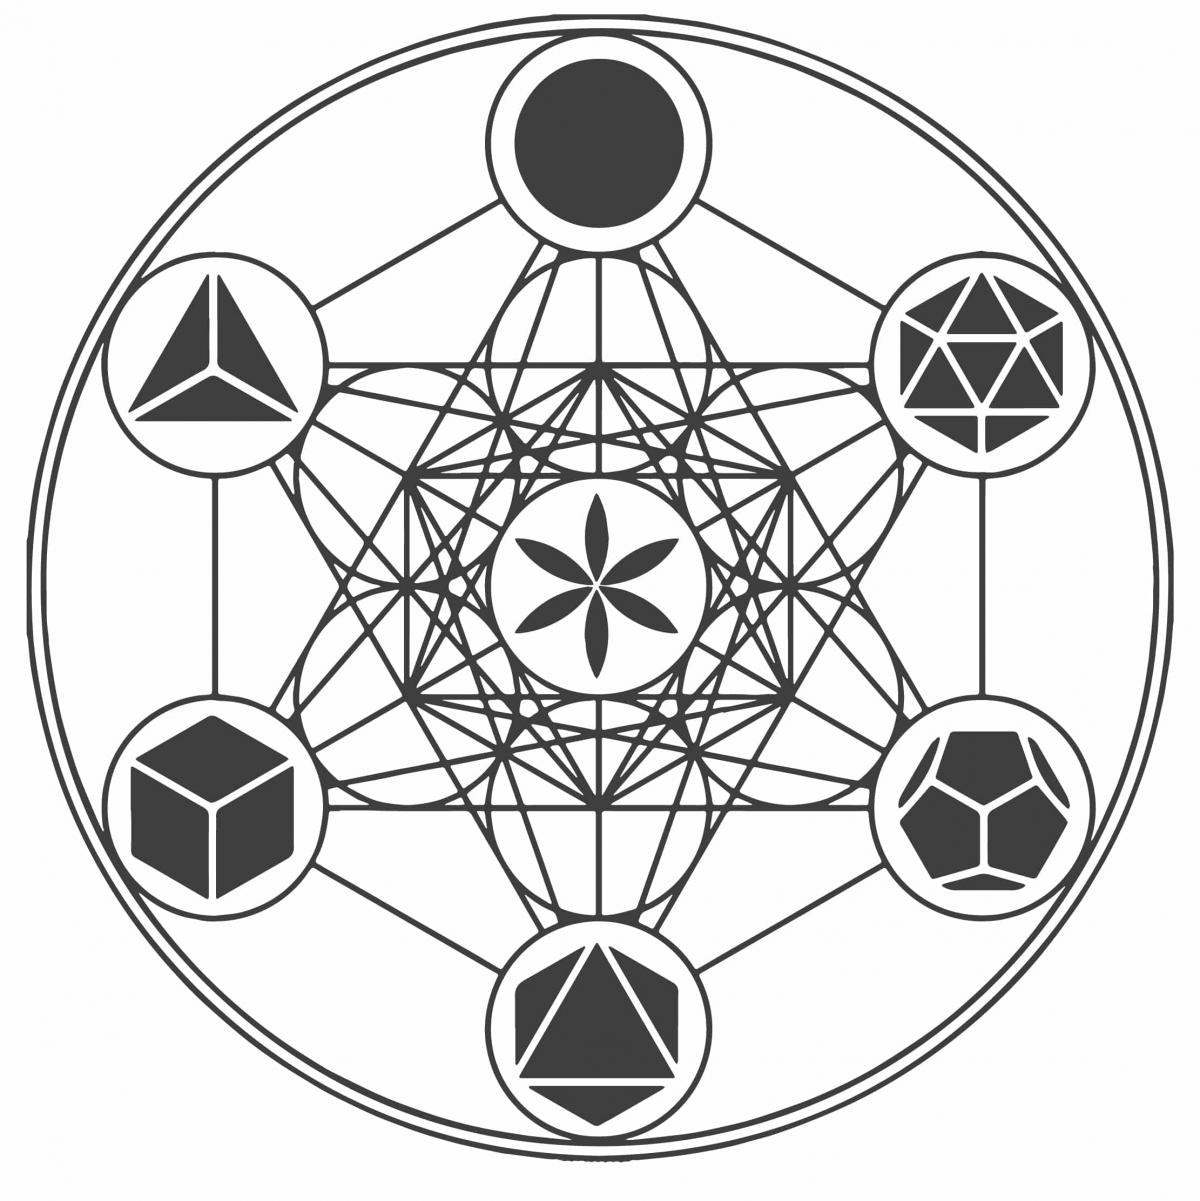 Metatrons-Cube-Symbol-Flower-Of-Life-Meaning-Symbolism-Story